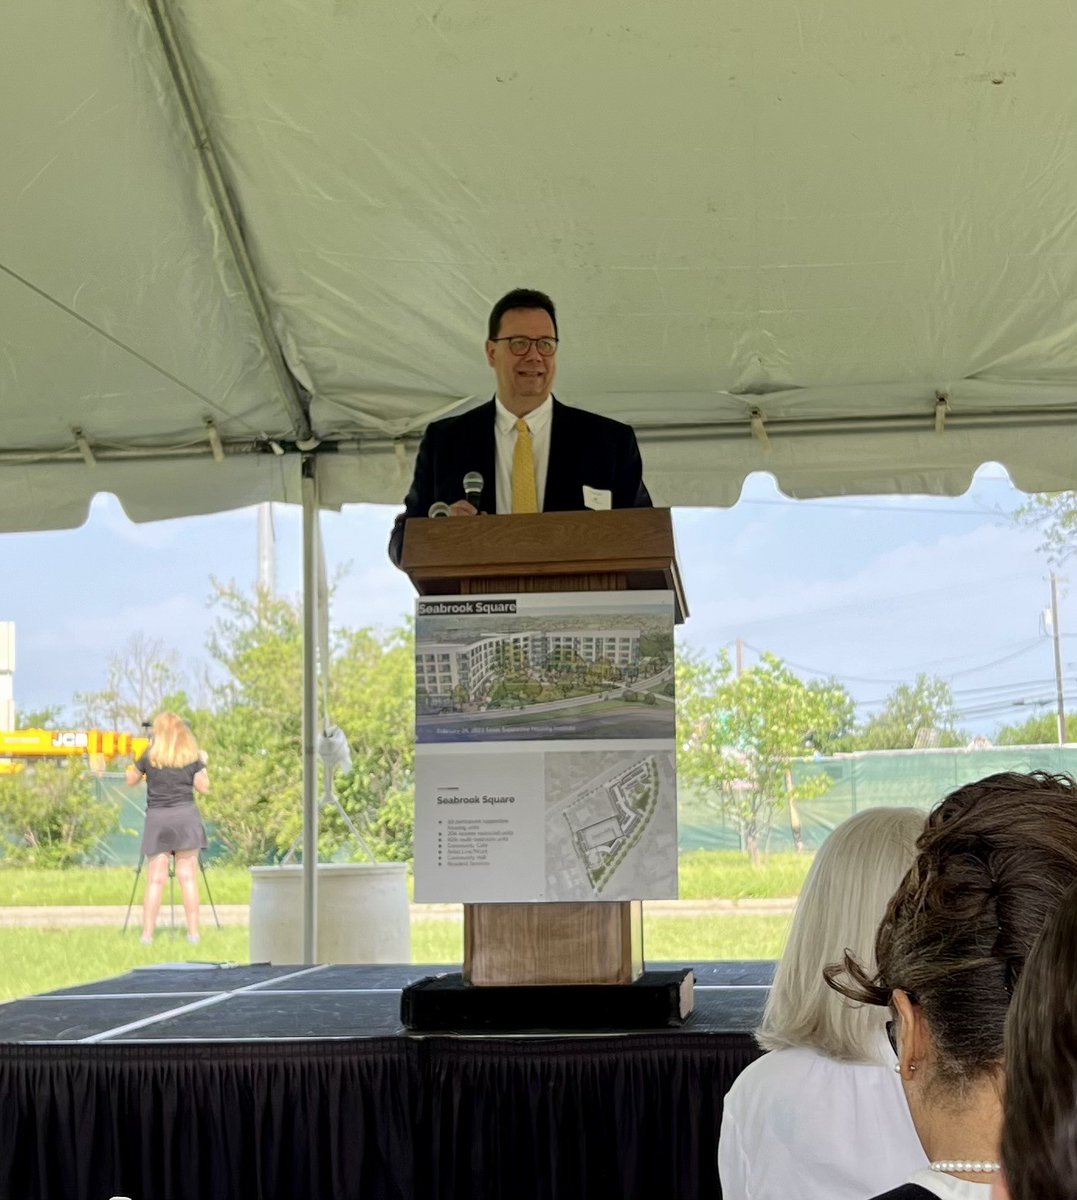 Yesterday we hosted a groundbreaking for Seabrook Square II, an apartment community that will provide permanent supportive housing to individuals experiencing homelessness in Travis County. Thanks to all the partners who made this possible!  #CommunityImpact #SupportiveHousing